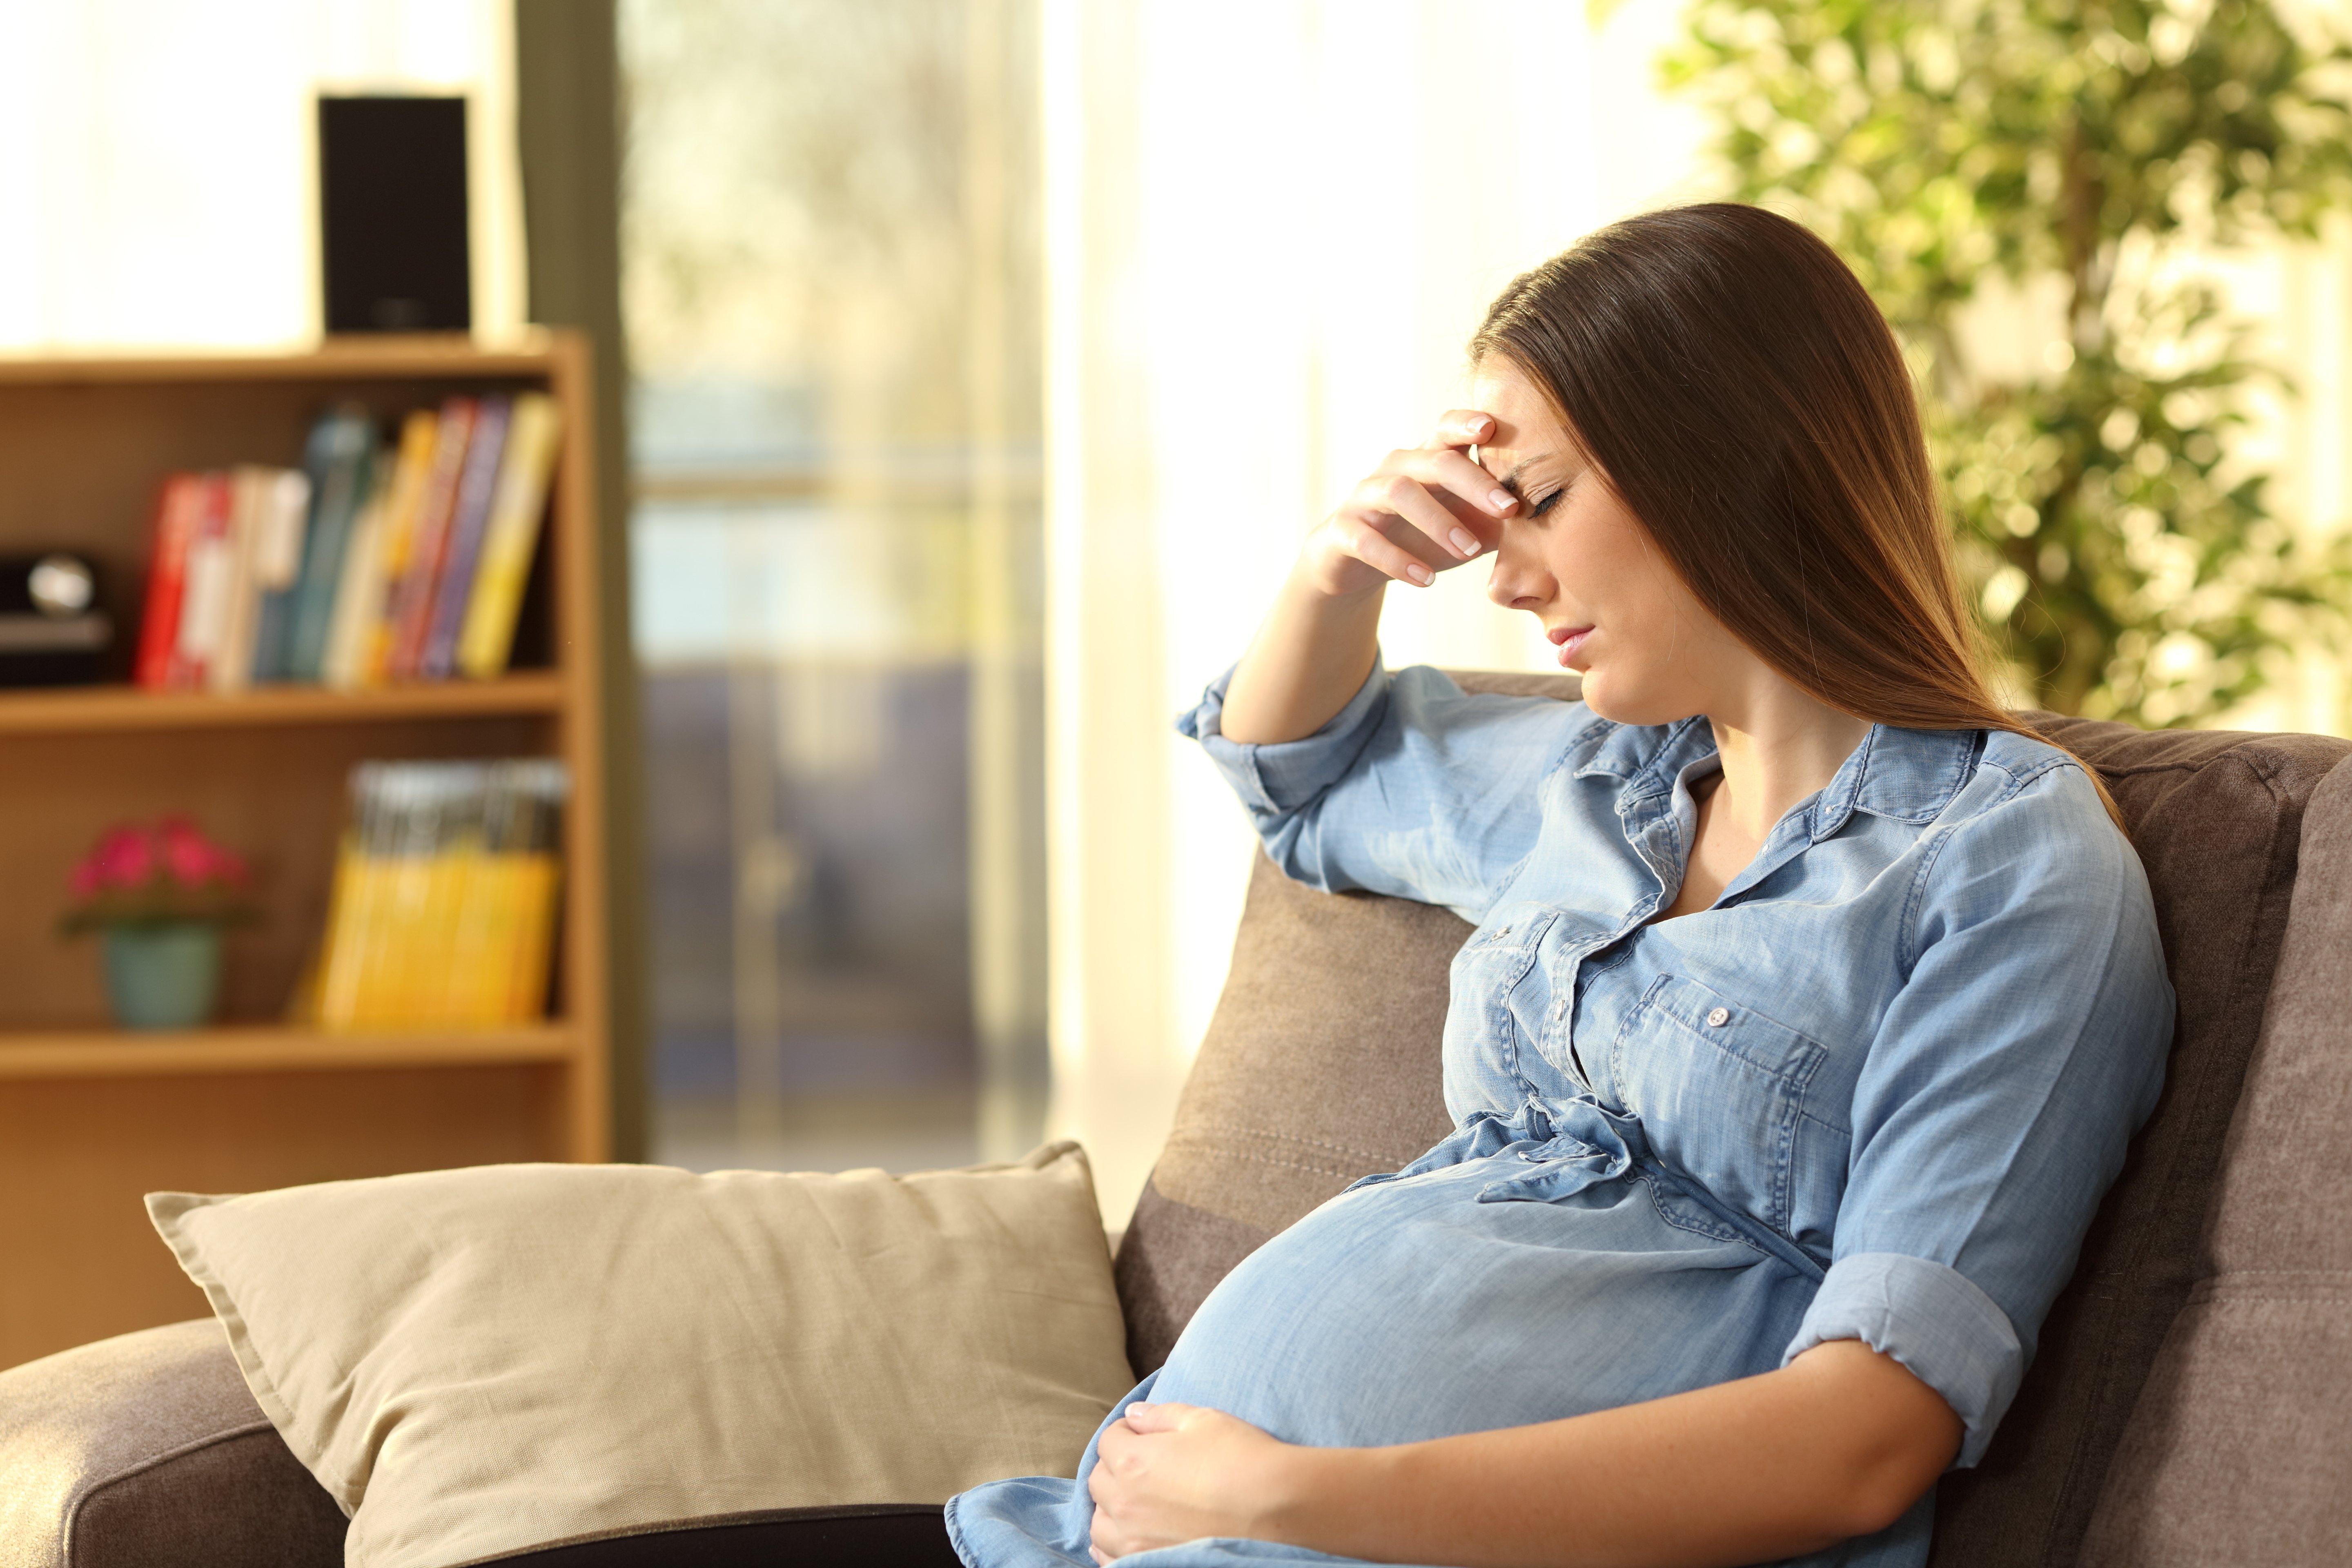 Pregnant woman sitting on a couch  | Photo: Shutterstock